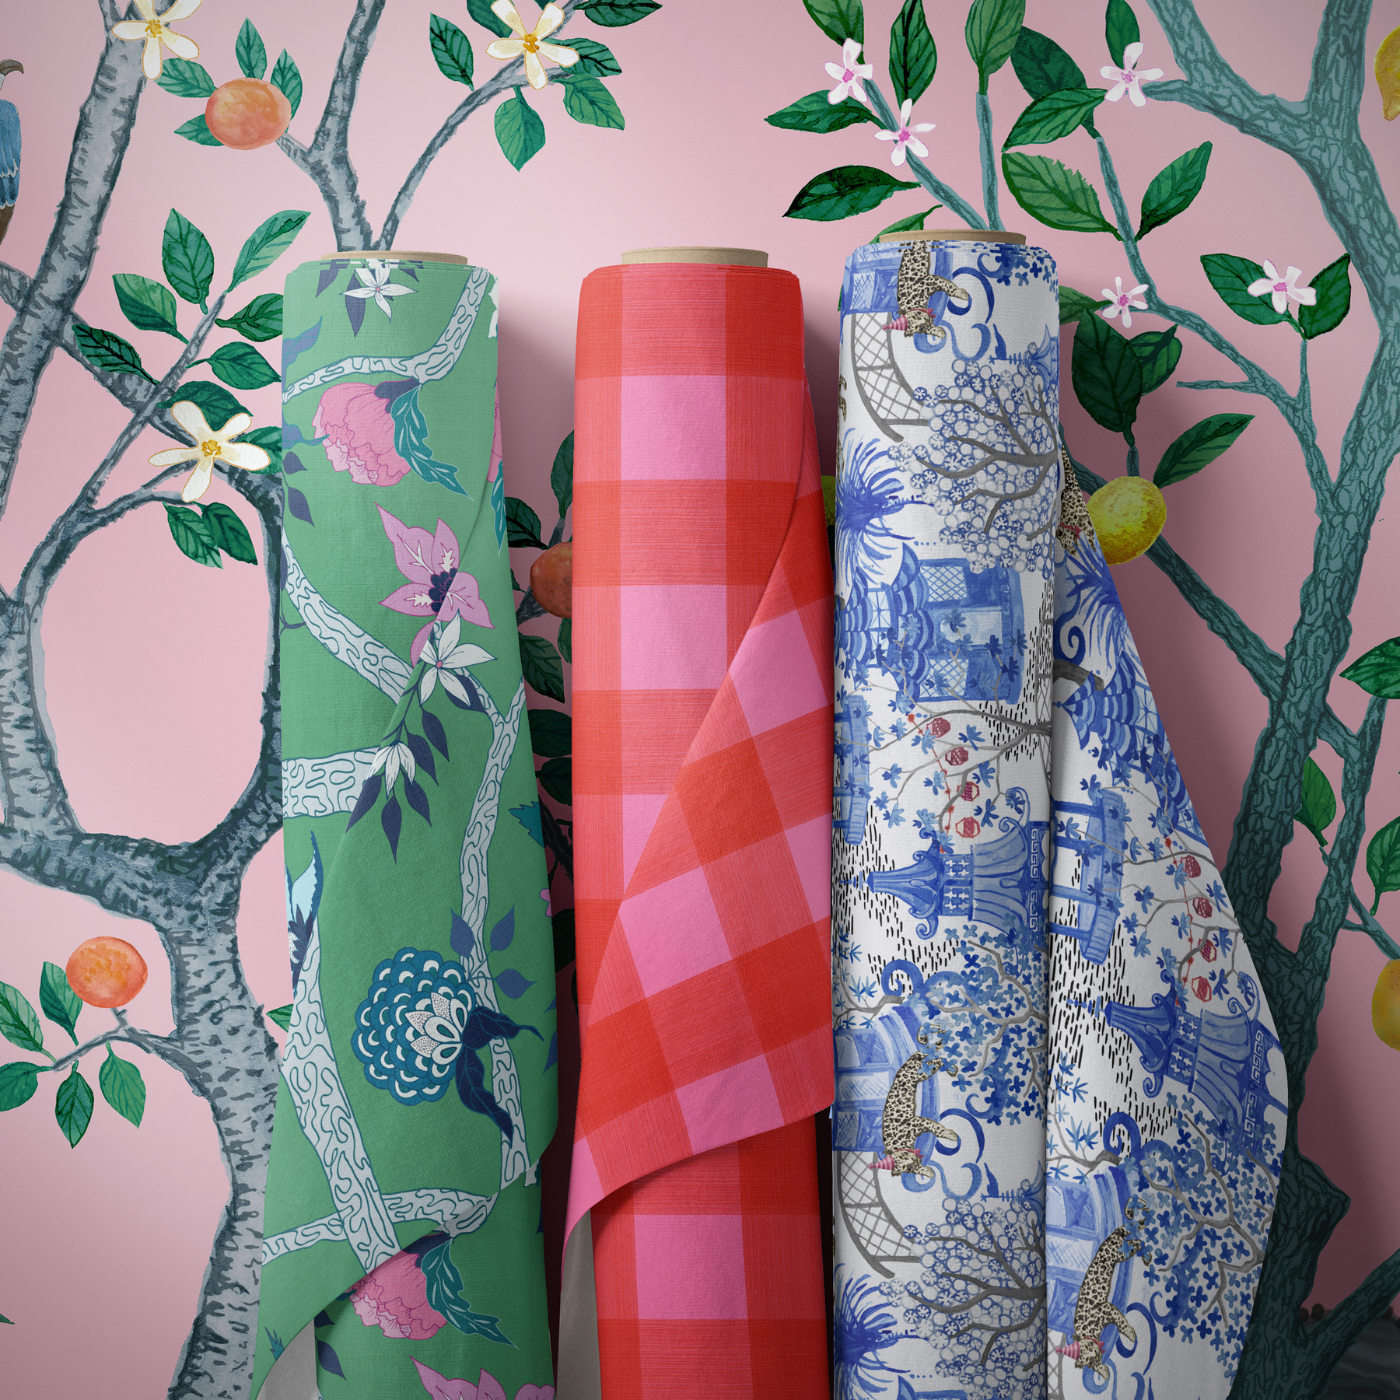 Pink wallpaper with wispy trees with oranges and small white blooms is behind three spools of fabric. The fabric on the left has a green background and white trees with blue accents with blue-and-white blooms as well as pink blooms and blue leaves. The middle fabric is a large pink-and-red-checkered design. The design on the right features repeating blue pagodas amidst trees with lots of small round white flowers, small gray fences and black-and-white leopards sleeping on tables and walking around the pagodas.